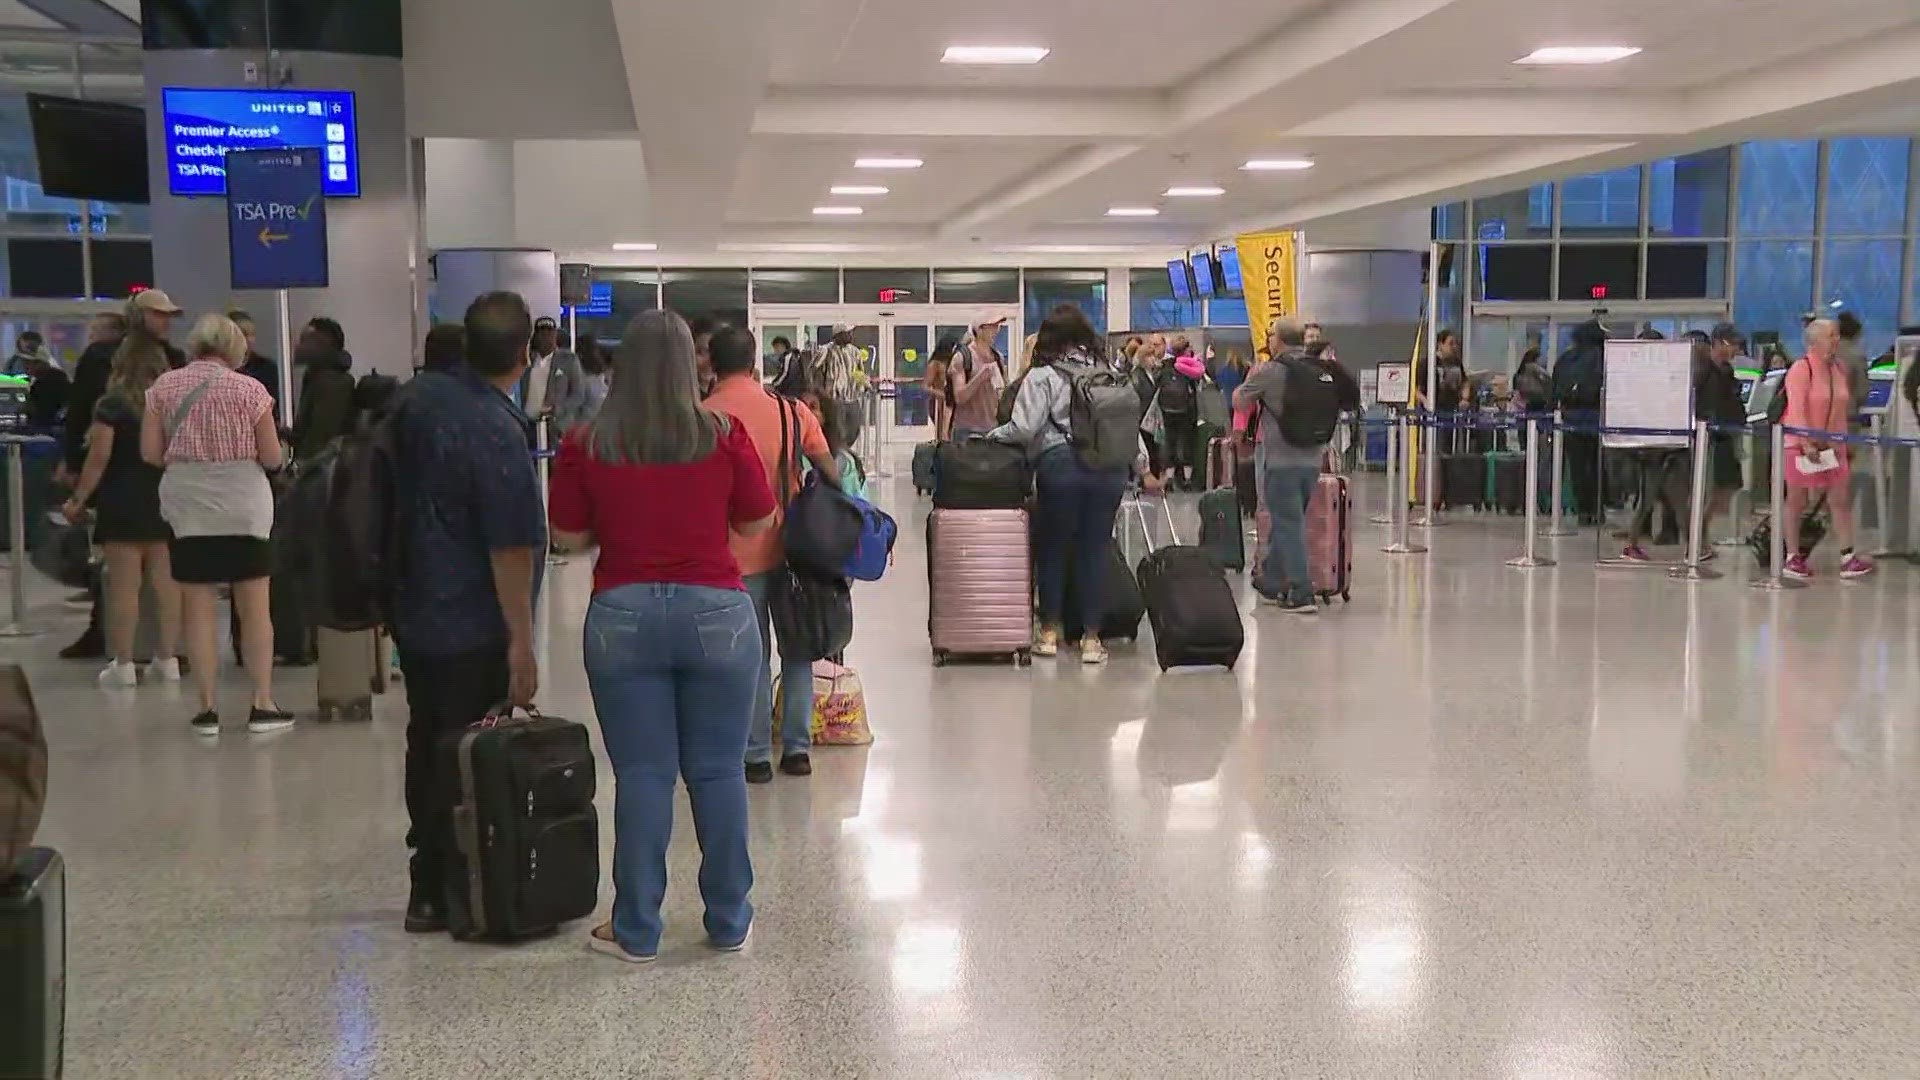 Houston Airports say they expected nearly one million passengers to fly for Memorial Day weekend.